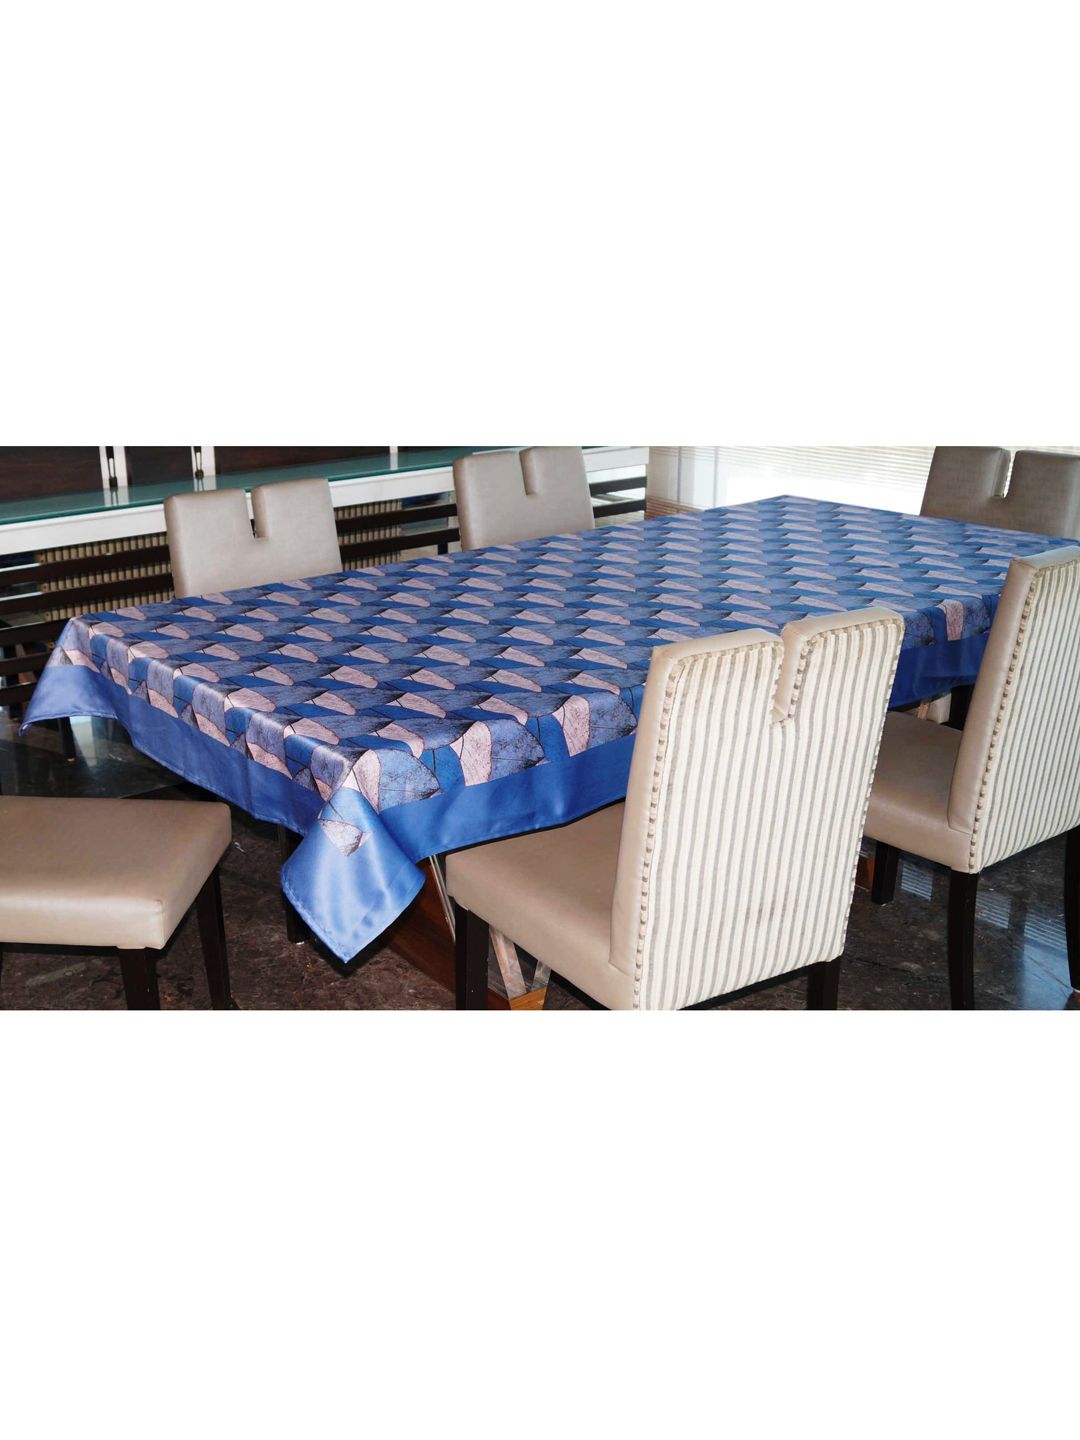 Lushomes Blue & Grey Digital Printed 6-Seater Rectangle Table Cover Price in India